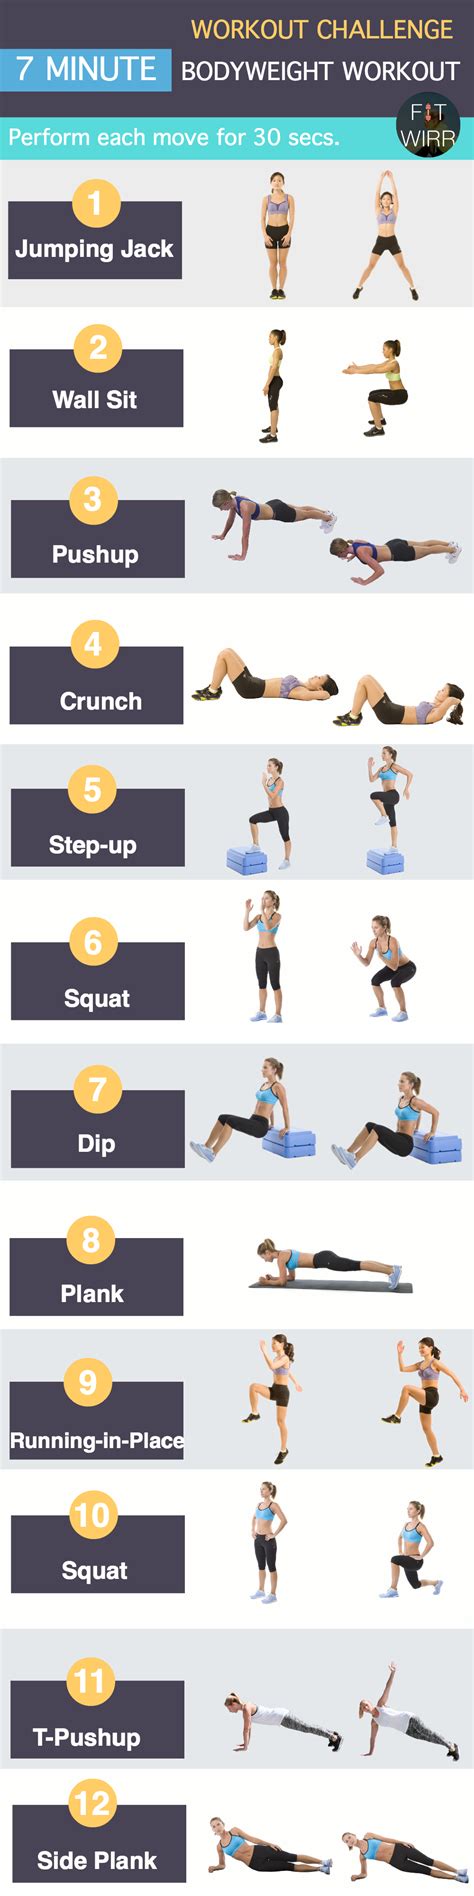 The Scientifically Designed 7 Minute Workout Challenge Hiit Workout